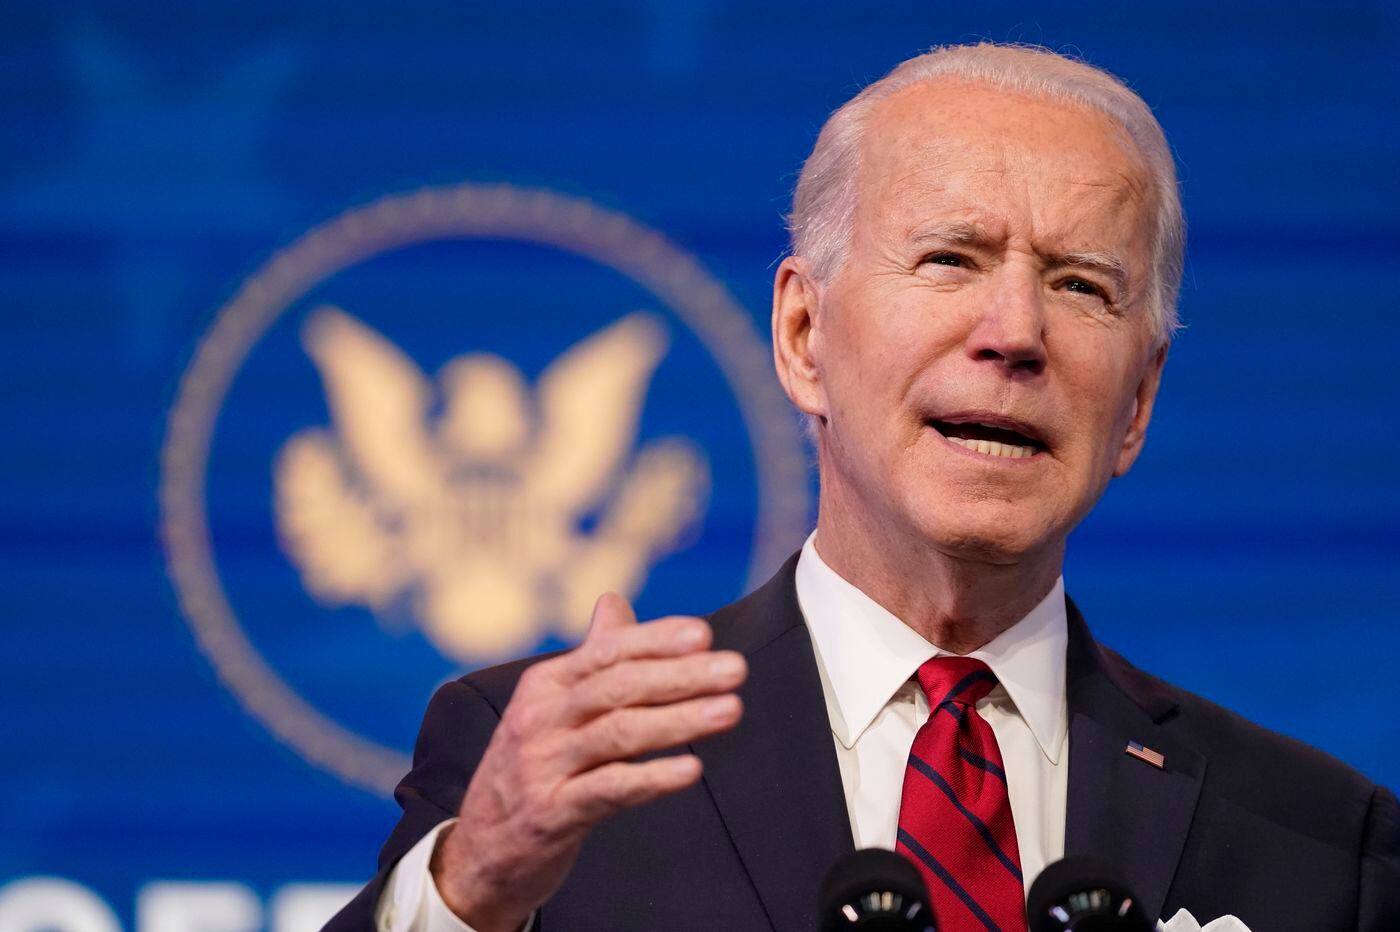 Joe Biden Will Be Inaugurated President Of A Country In Crisis